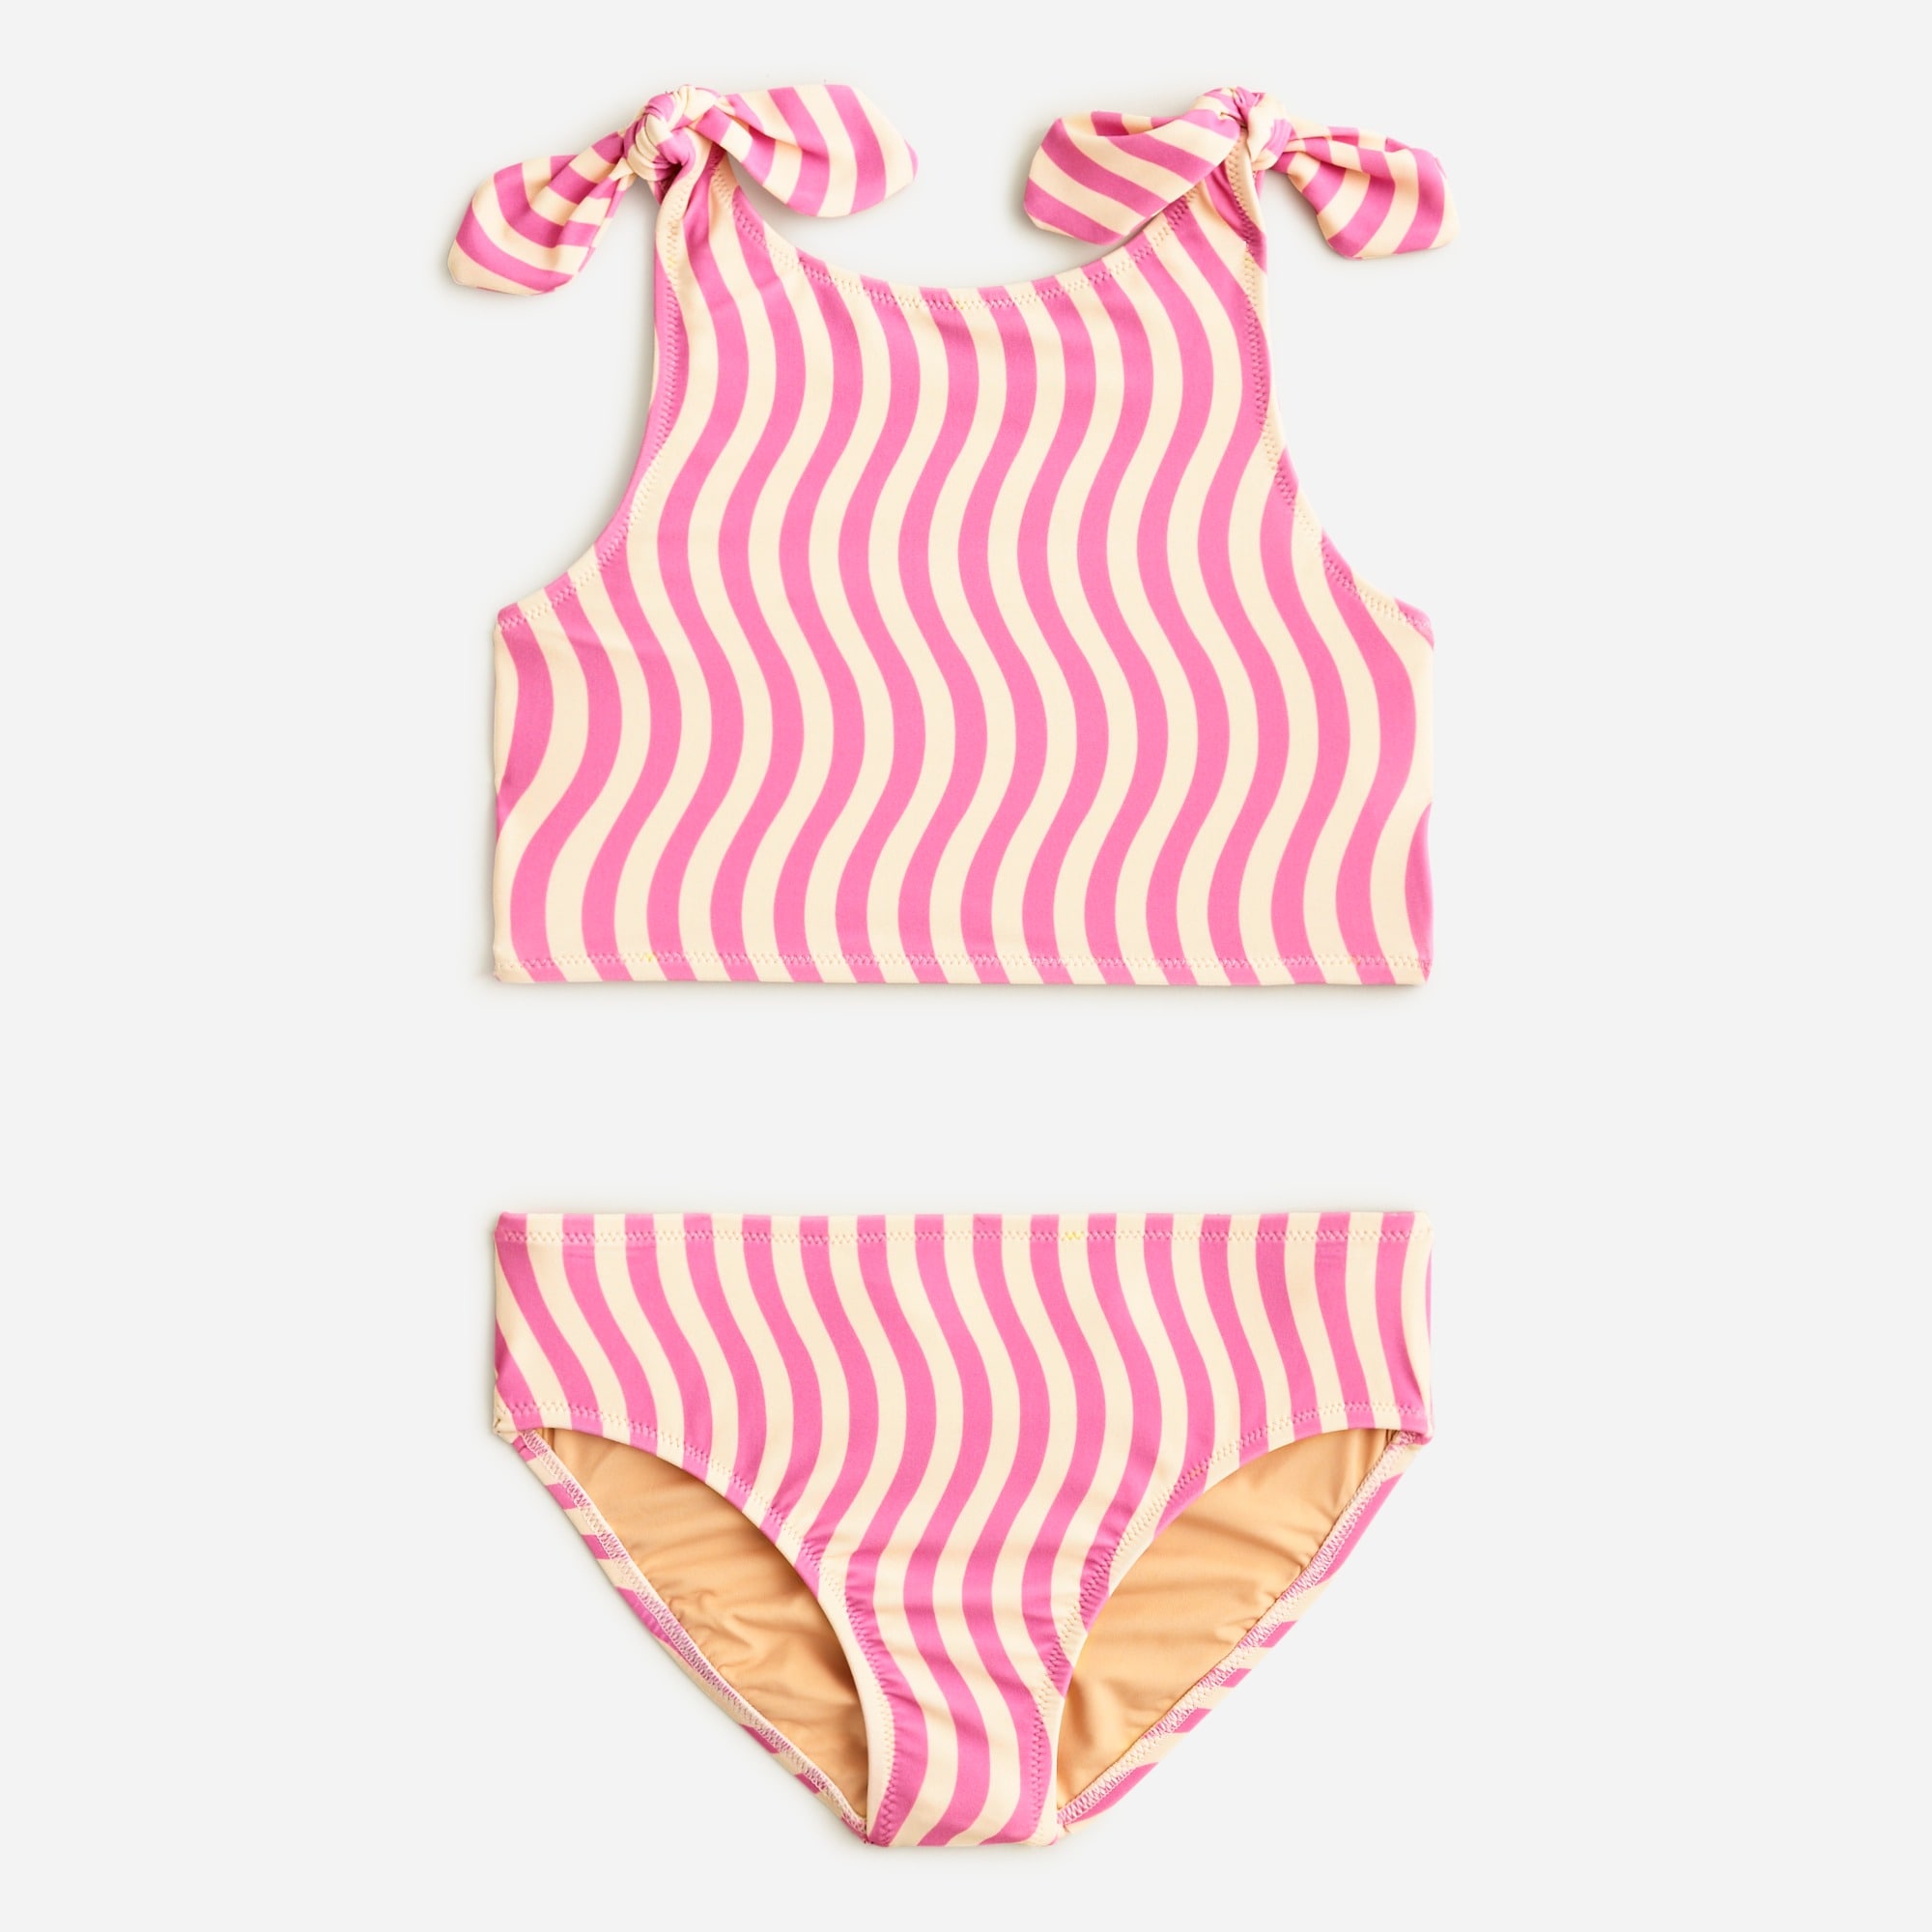  Girls' tie-shoulder two-piece swimsuit with UPF 50+